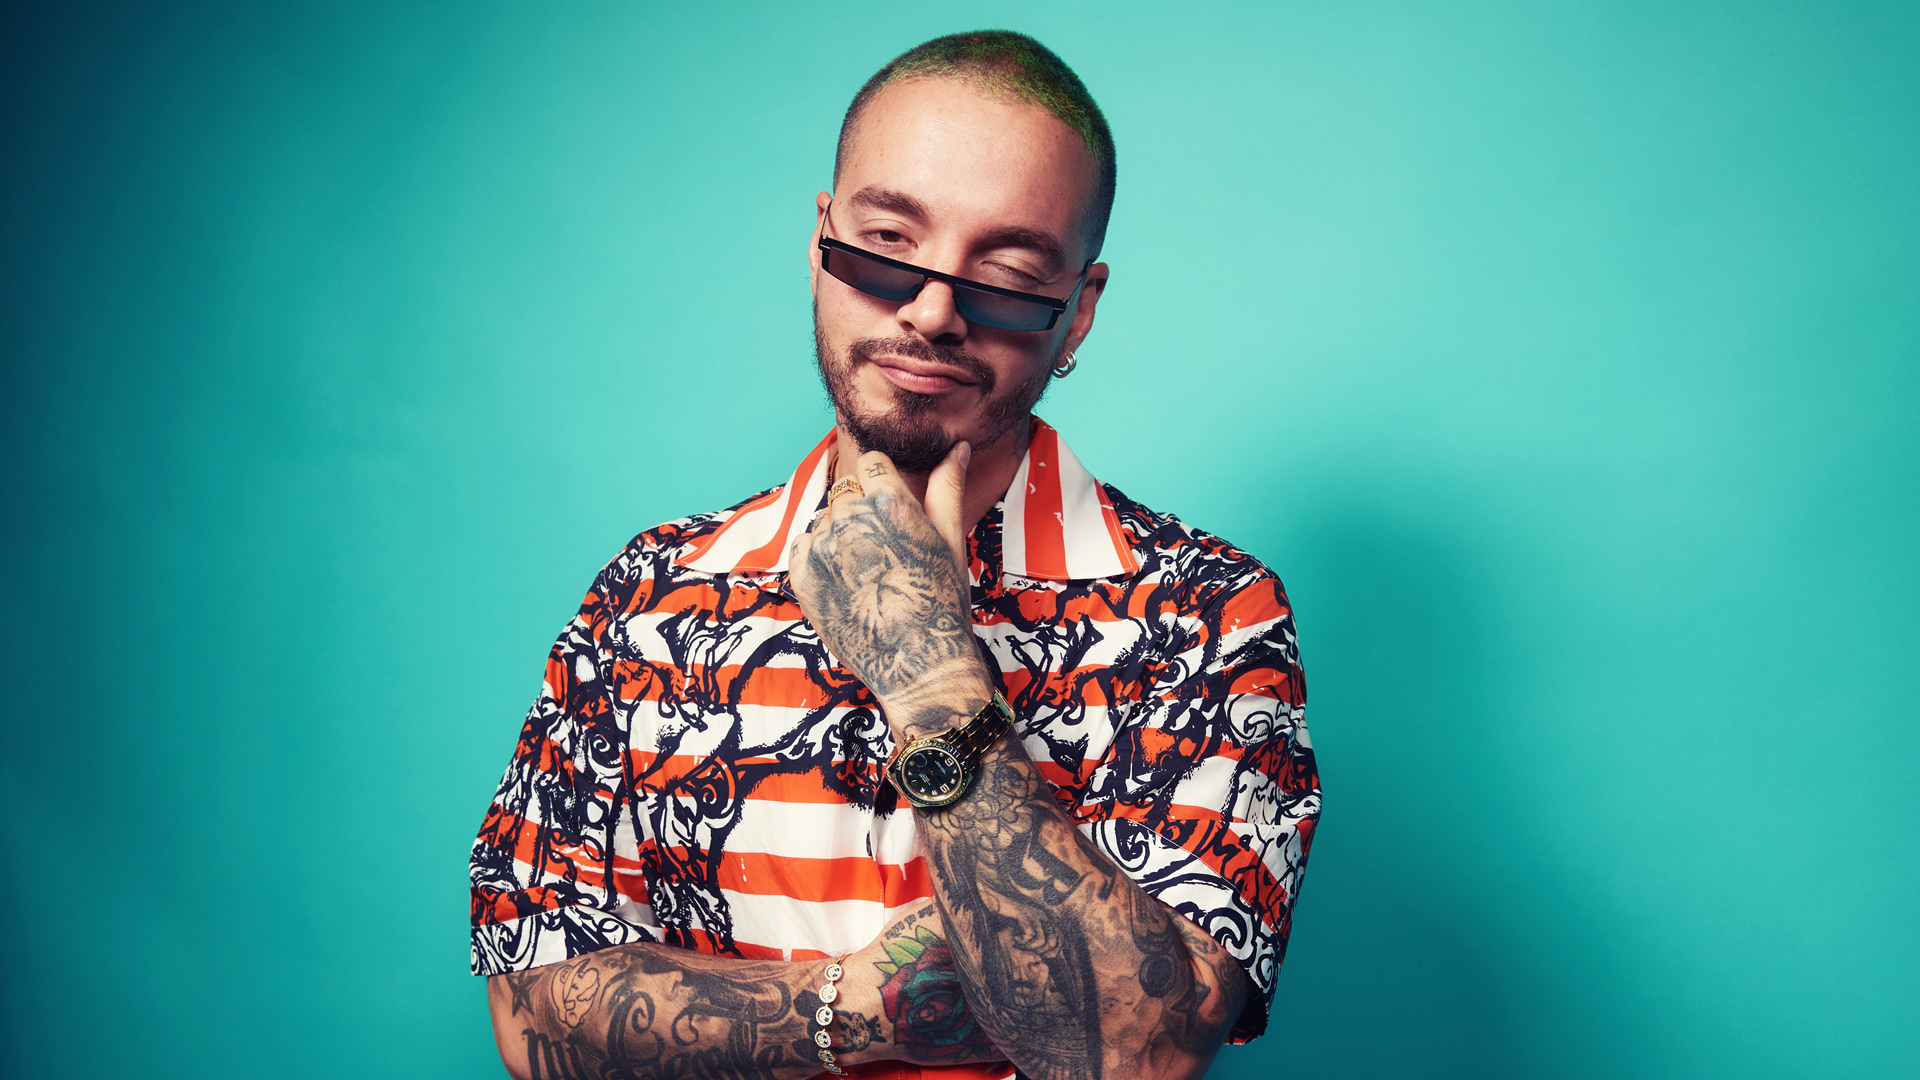 #JBalvinIsOverParty trends on Twitter after J Balvin disses Shakira, angry fans ask him to ‘respect the queen’